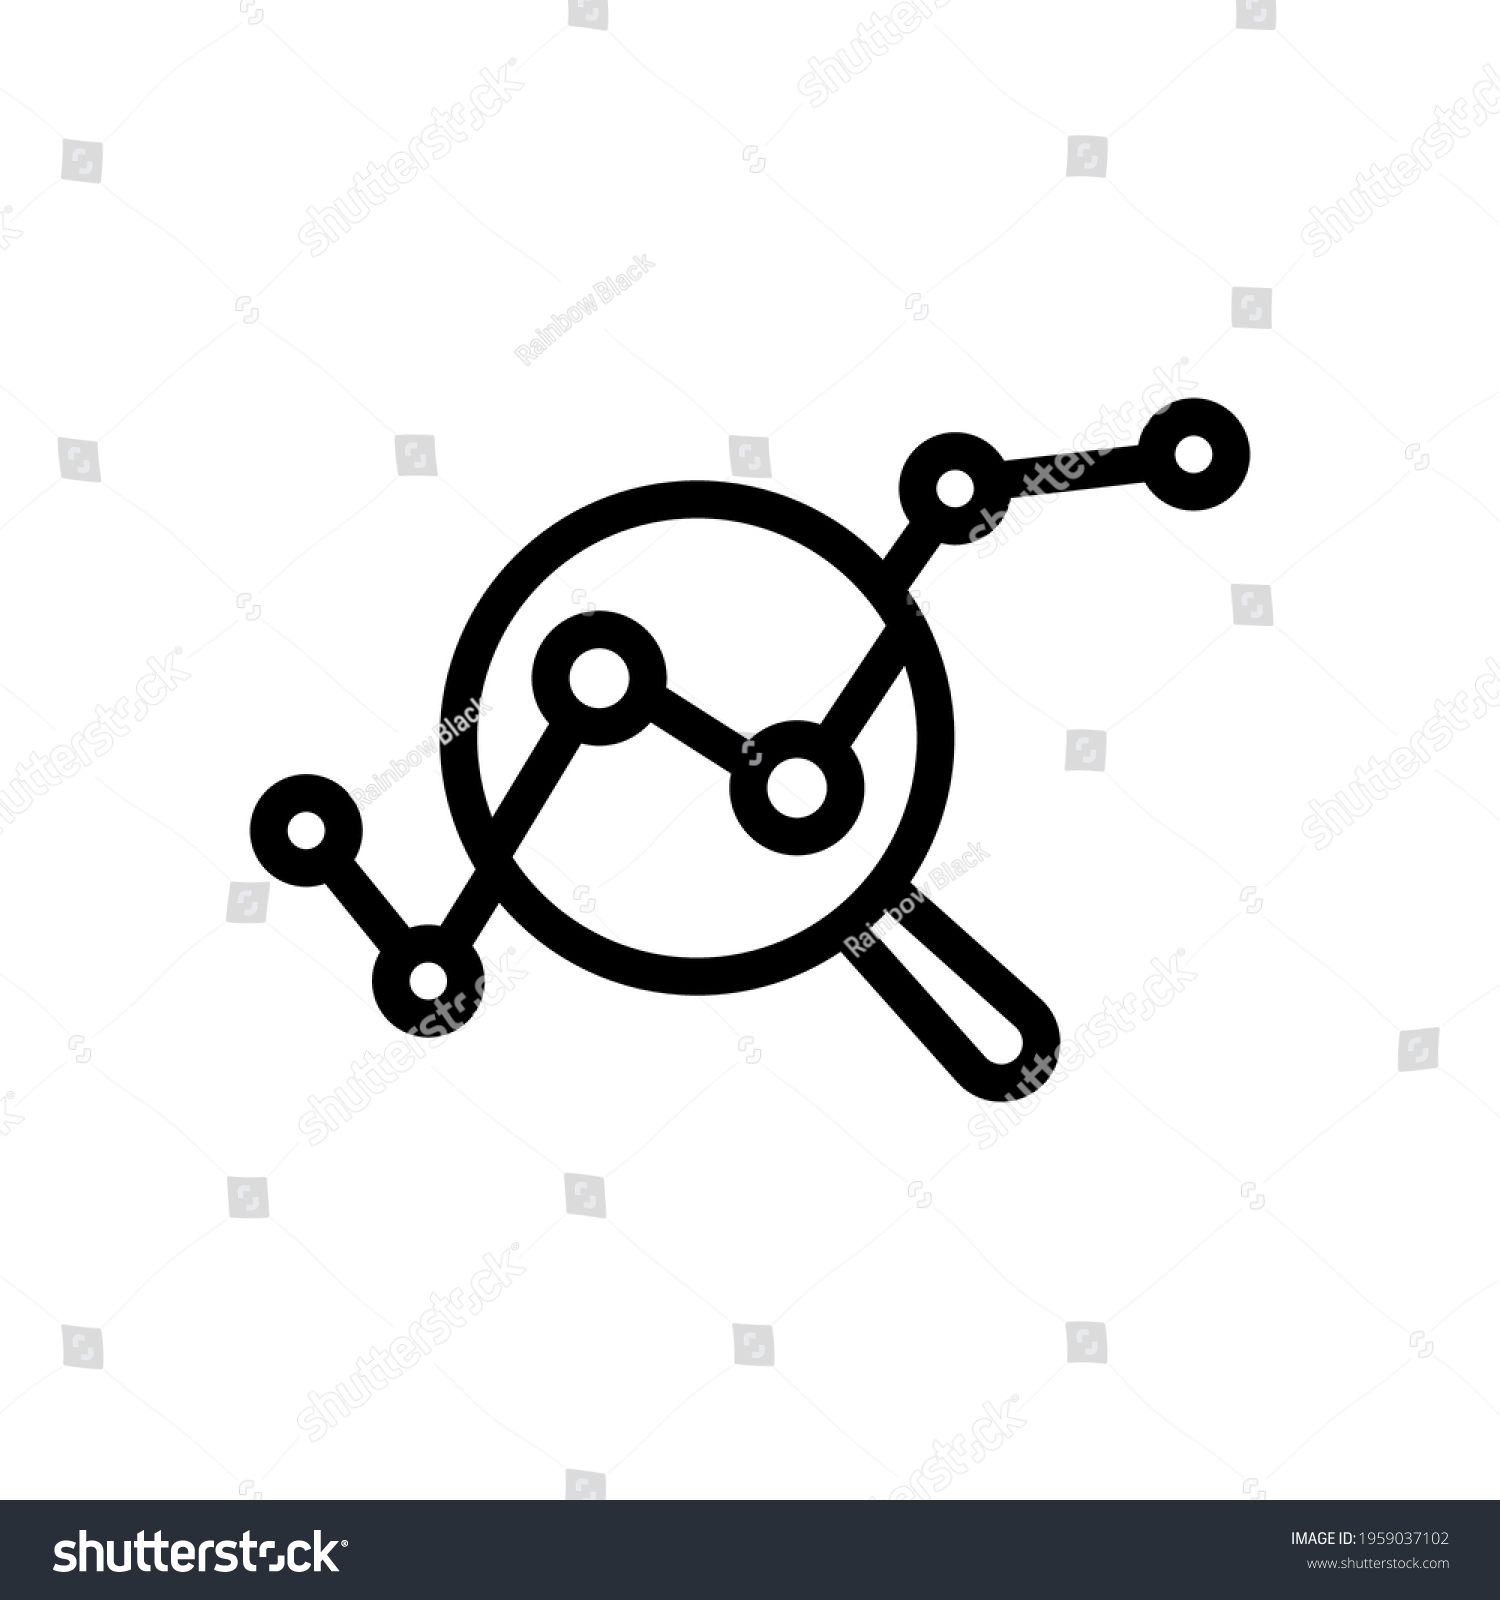 SVG of Financial forecast, Analysis and predict, business research, simple icon. Black icon on white background svg